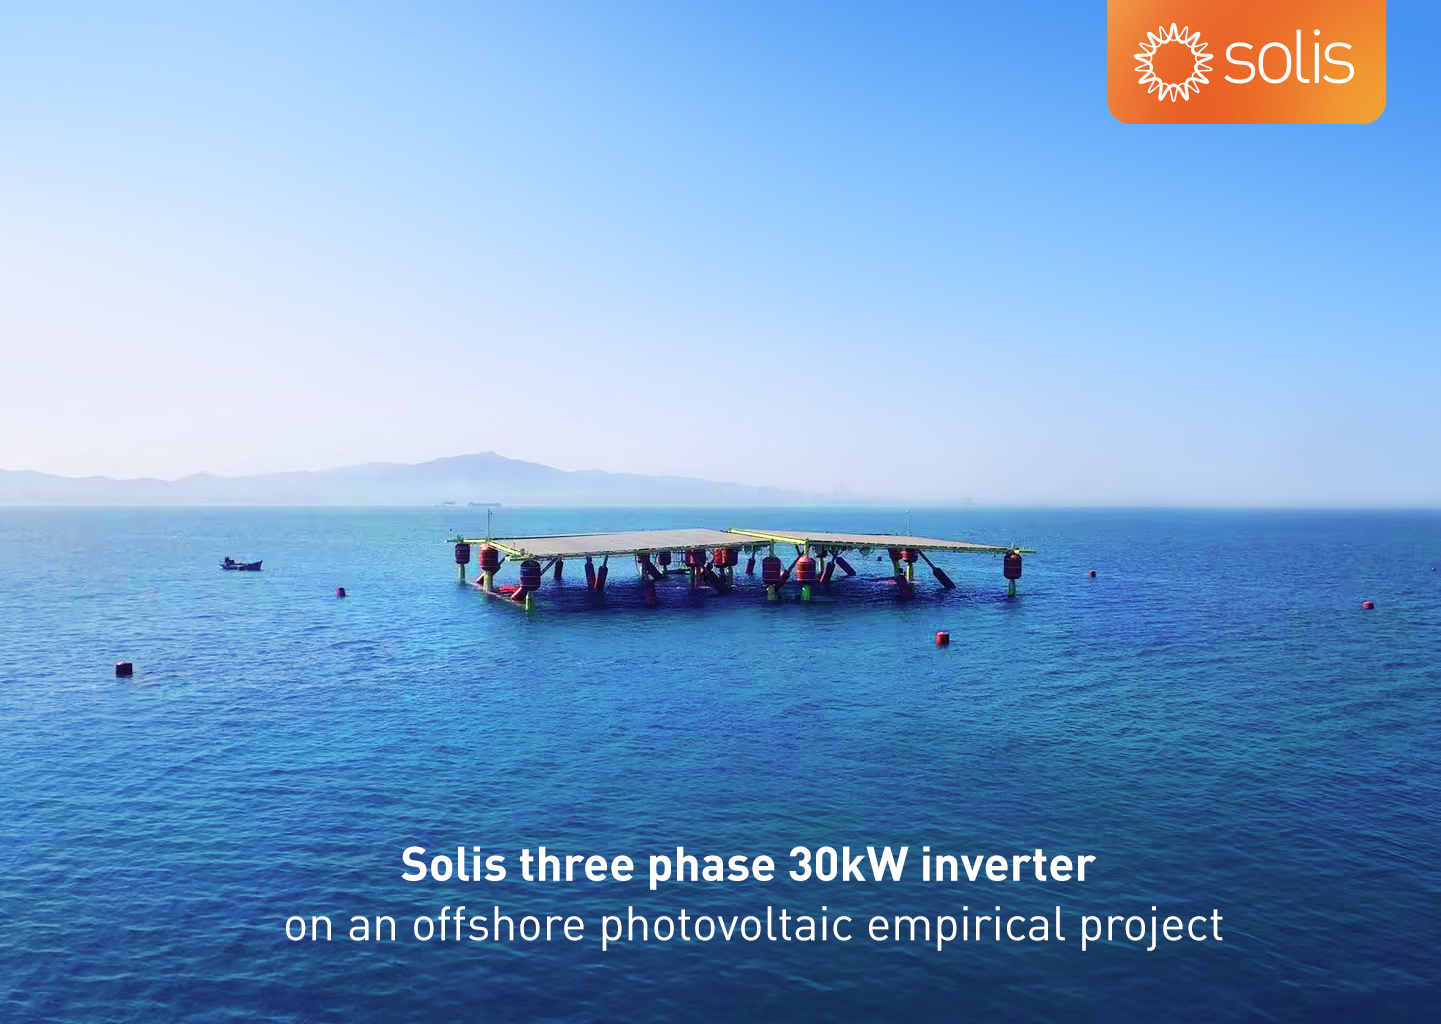 30kW inverter supported an offshore photovoltaic empirical project